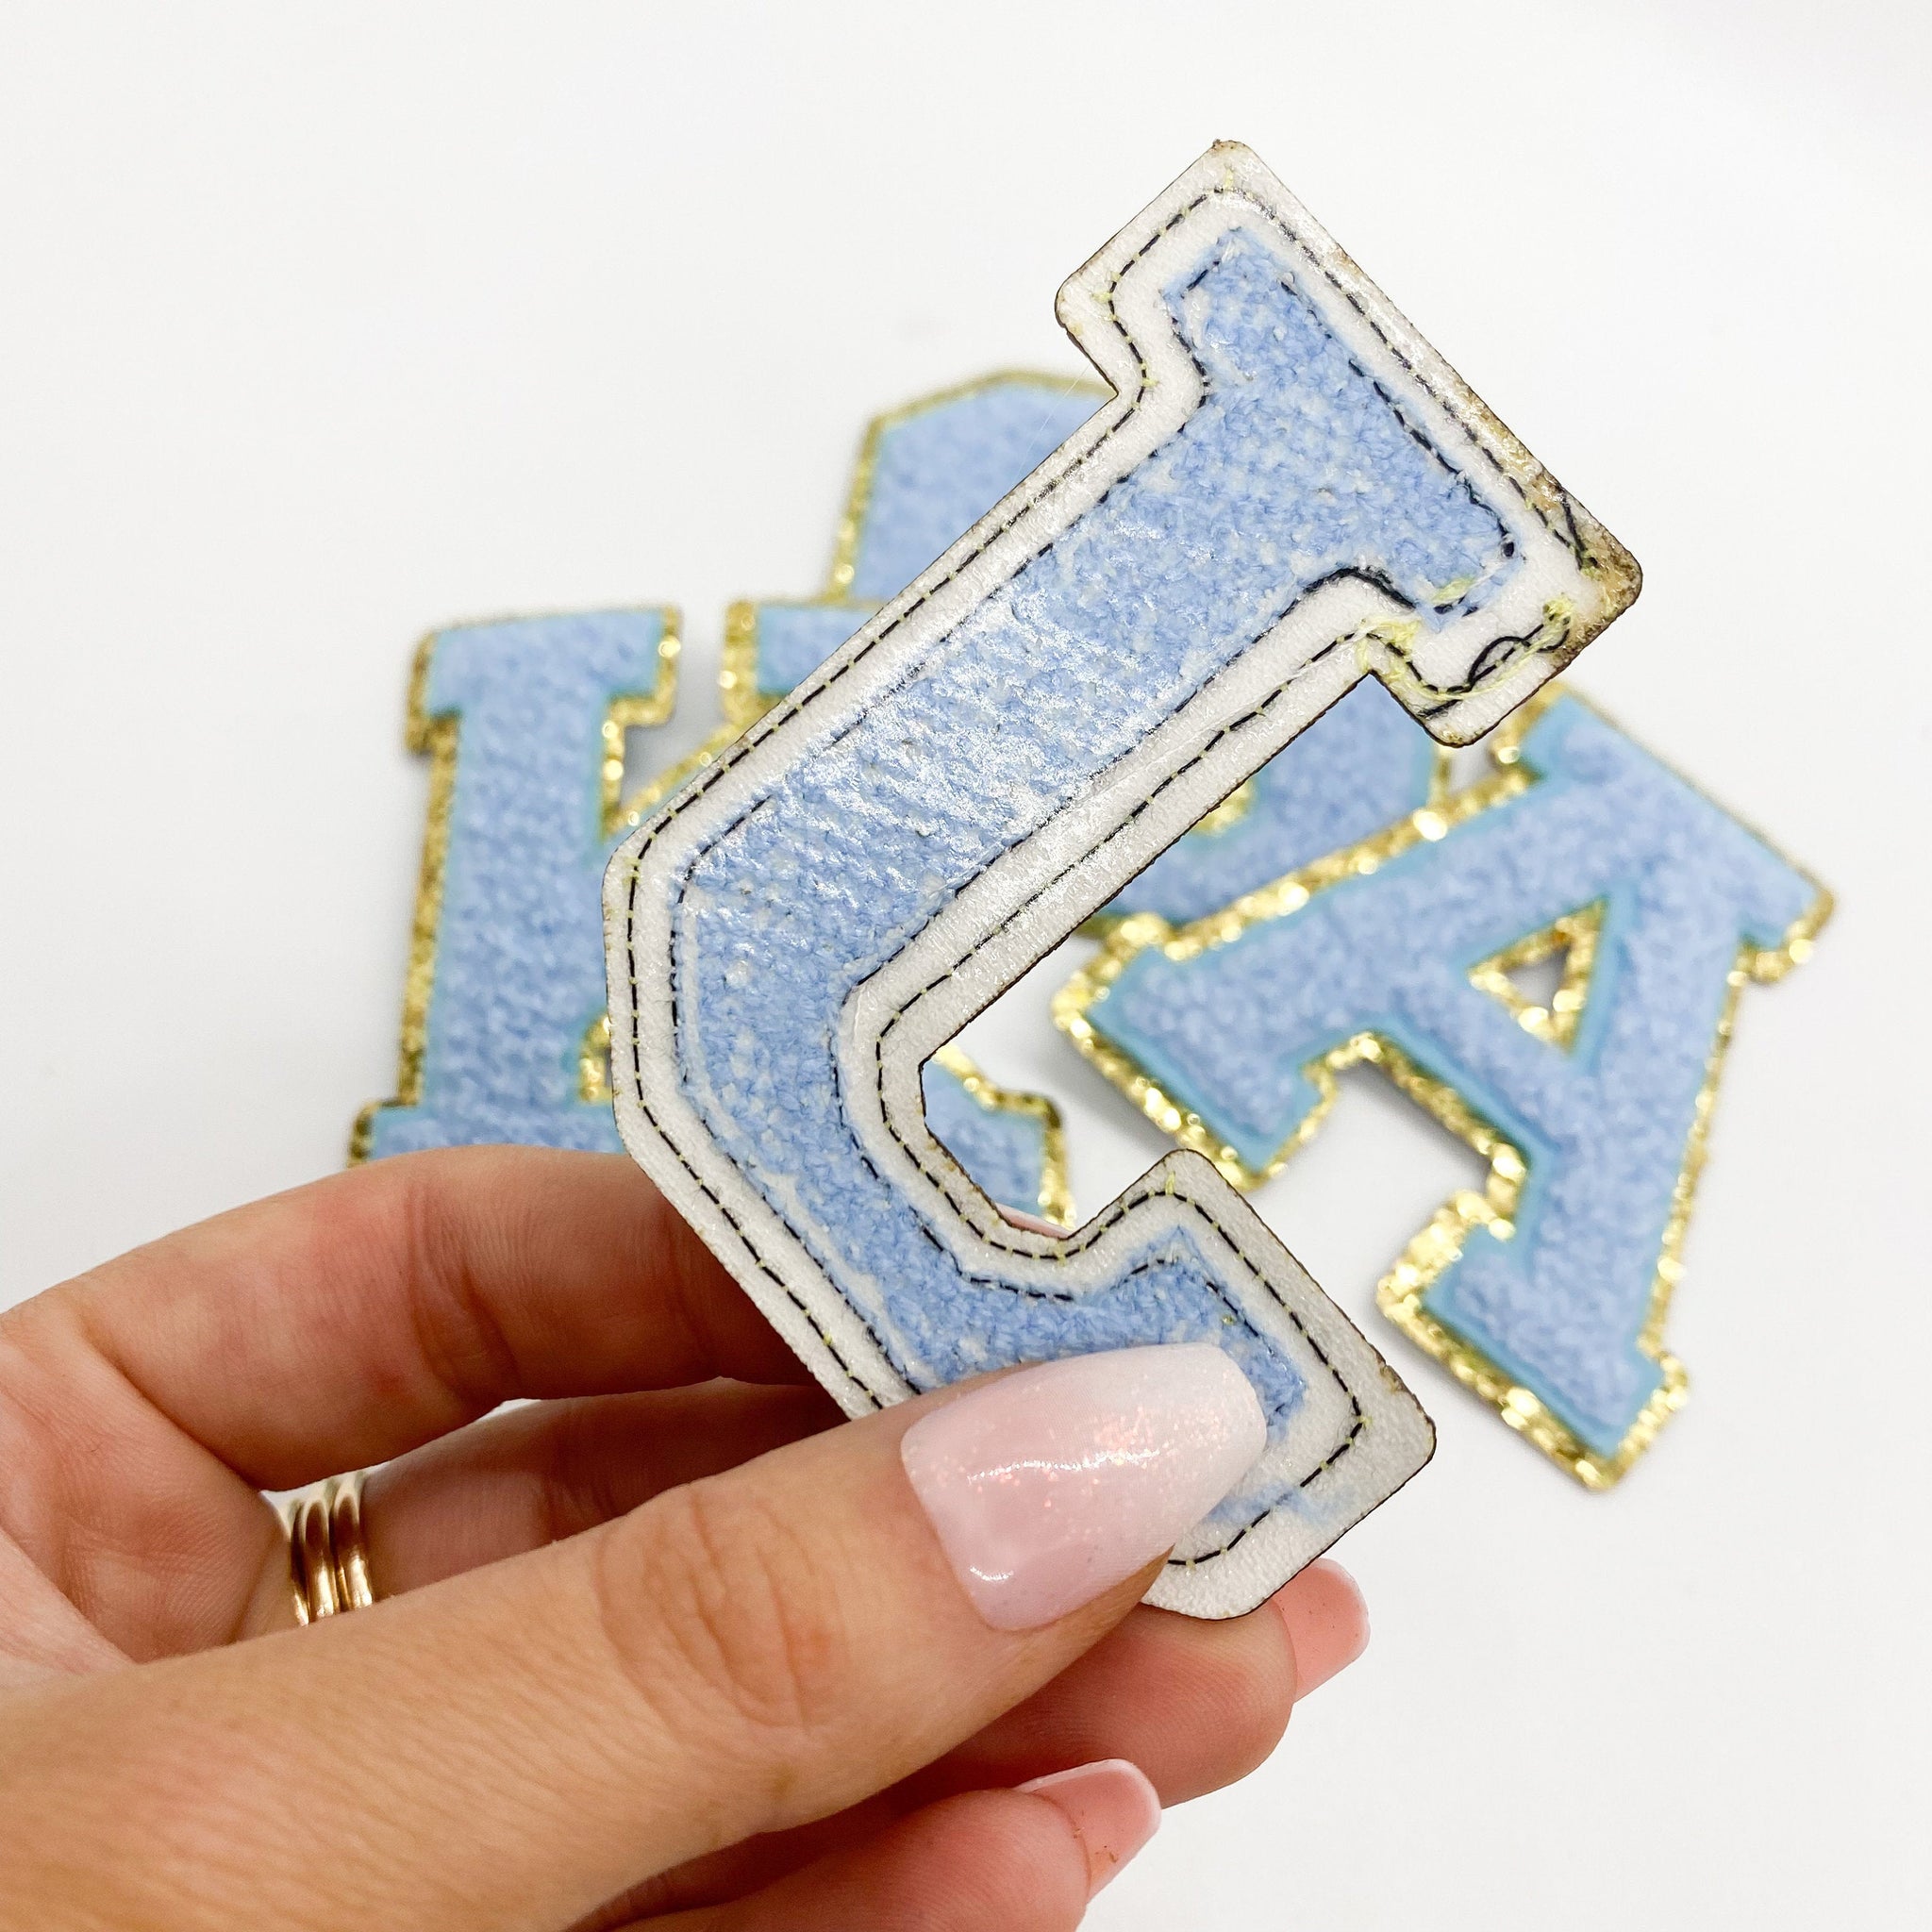 Blue Iron On Varsity Letter Patches - Set of 3 Letters - Large 8 cm Ch —